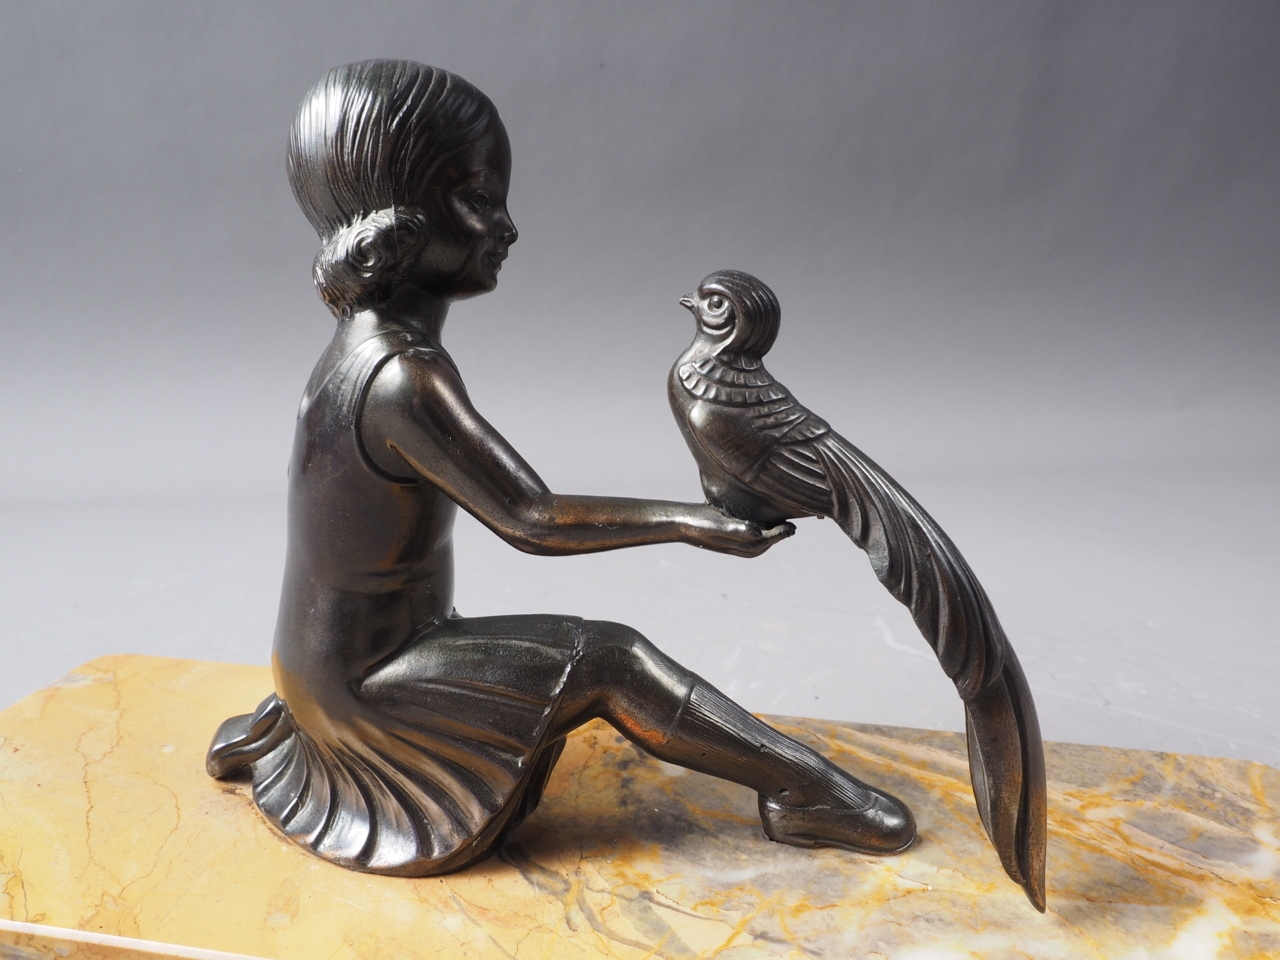 An Art Deco bronzed figure group, girl with bird, on yellow marble base, 11" wide - Image 3 of 3